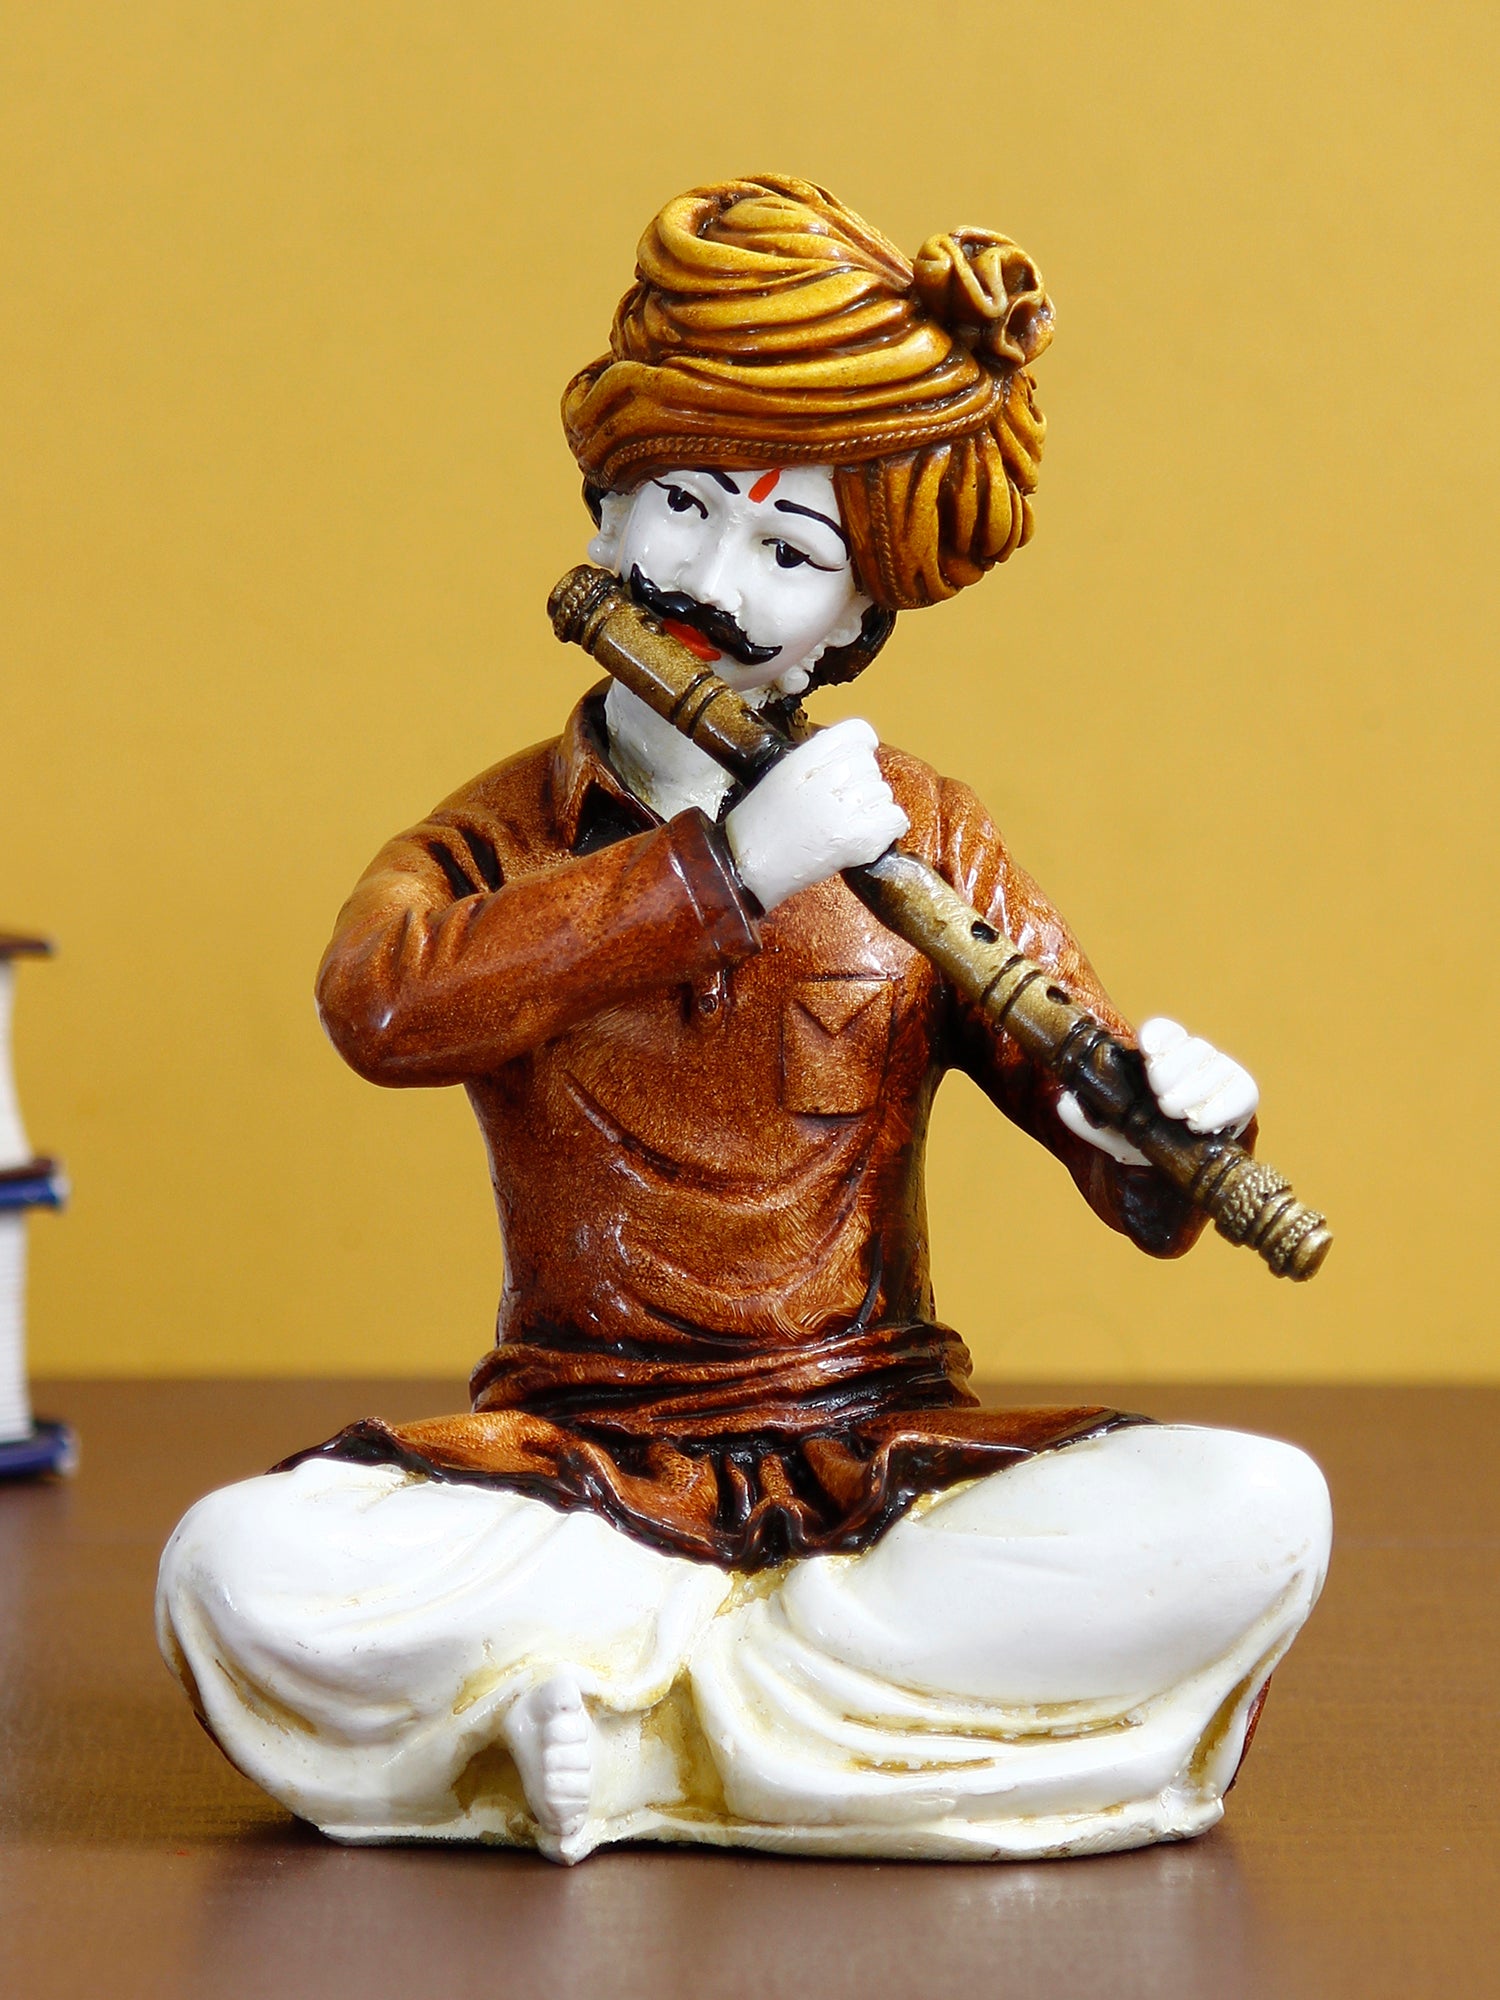 Polyresin Rajasthani Musician Men Statue Playing Flute Human Figurines Home Decor Showpiece